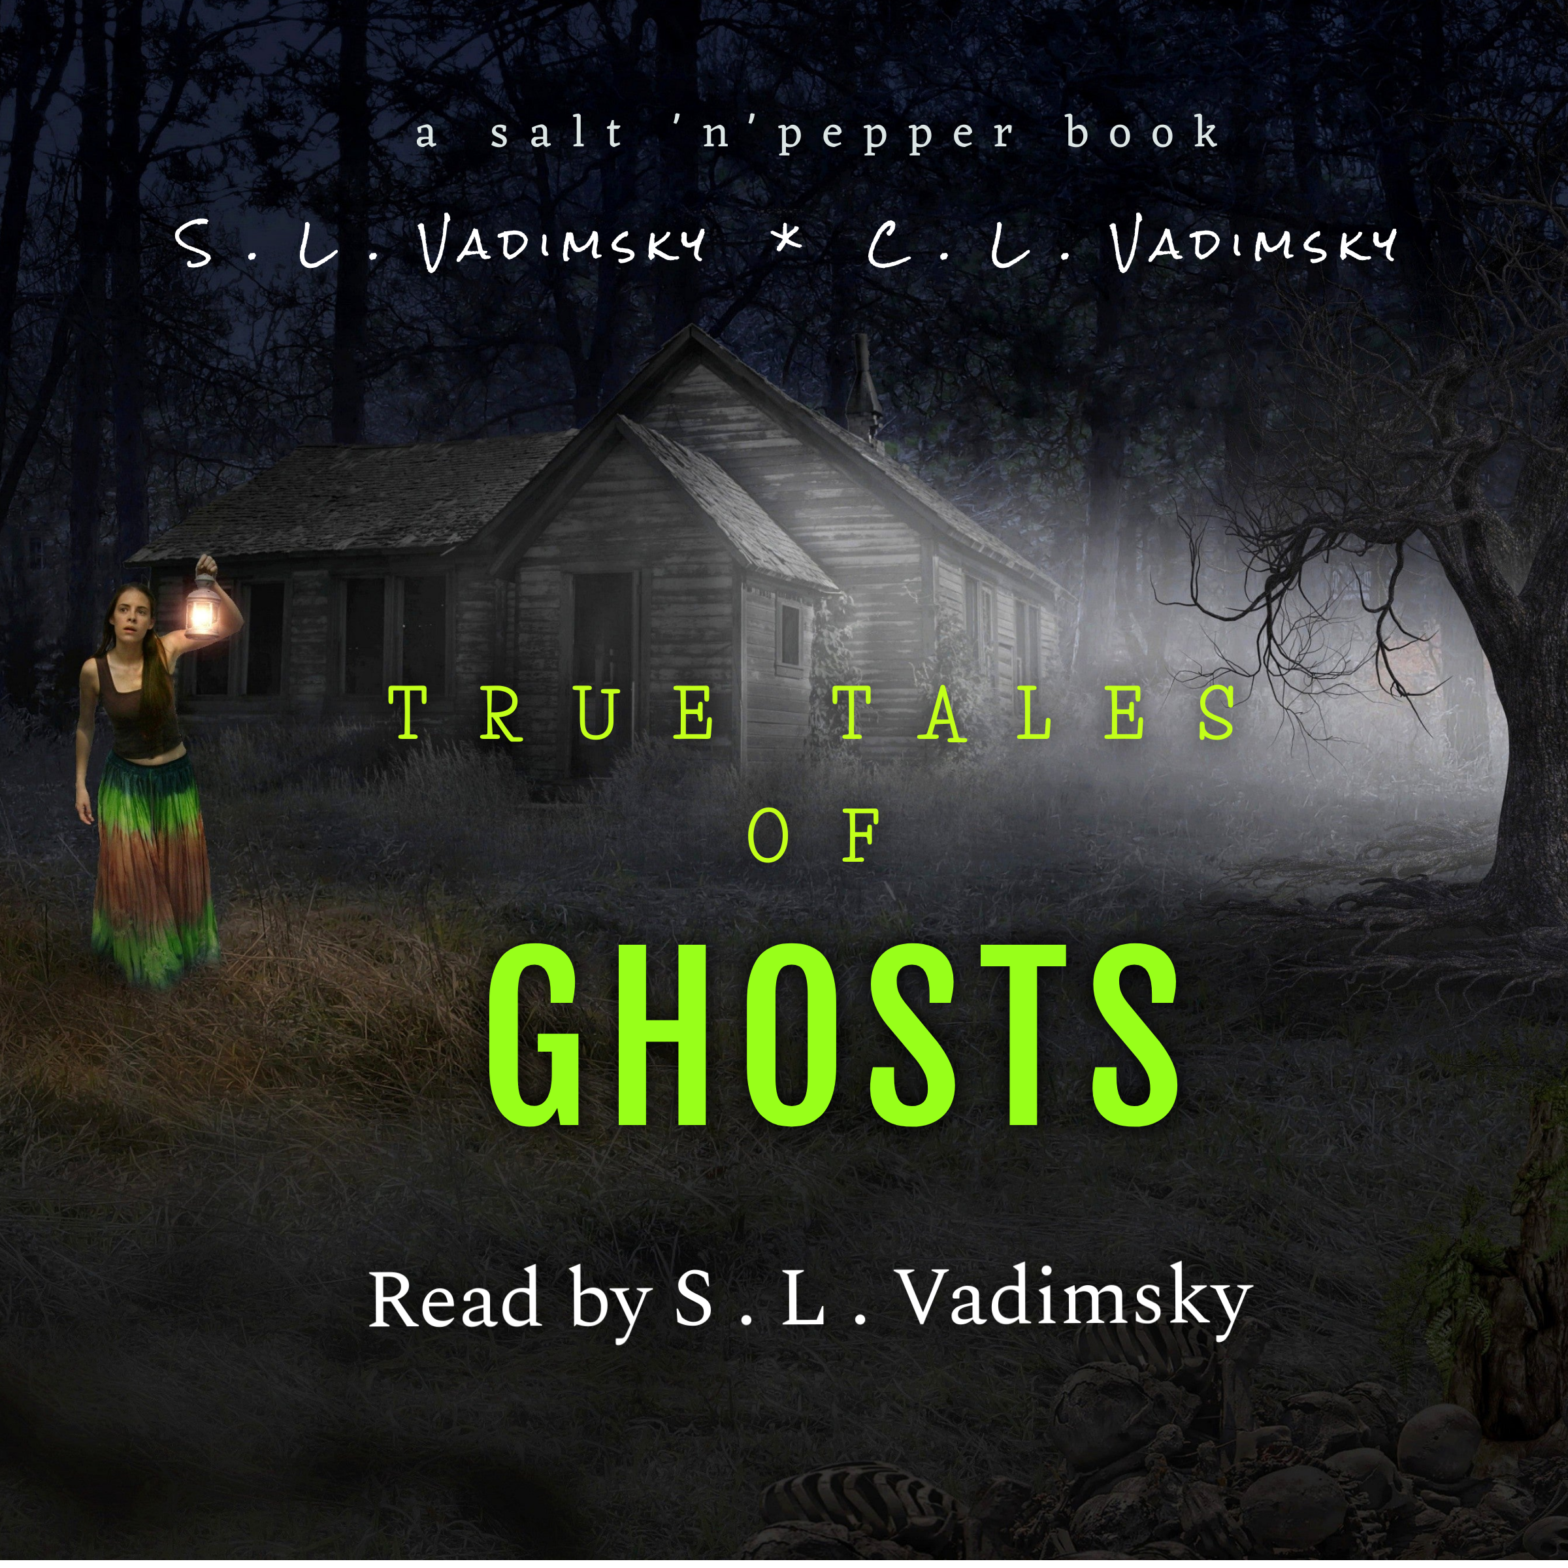 book cover shows a young woman in a long skirt holding a lantern outside a cabin at night in mist